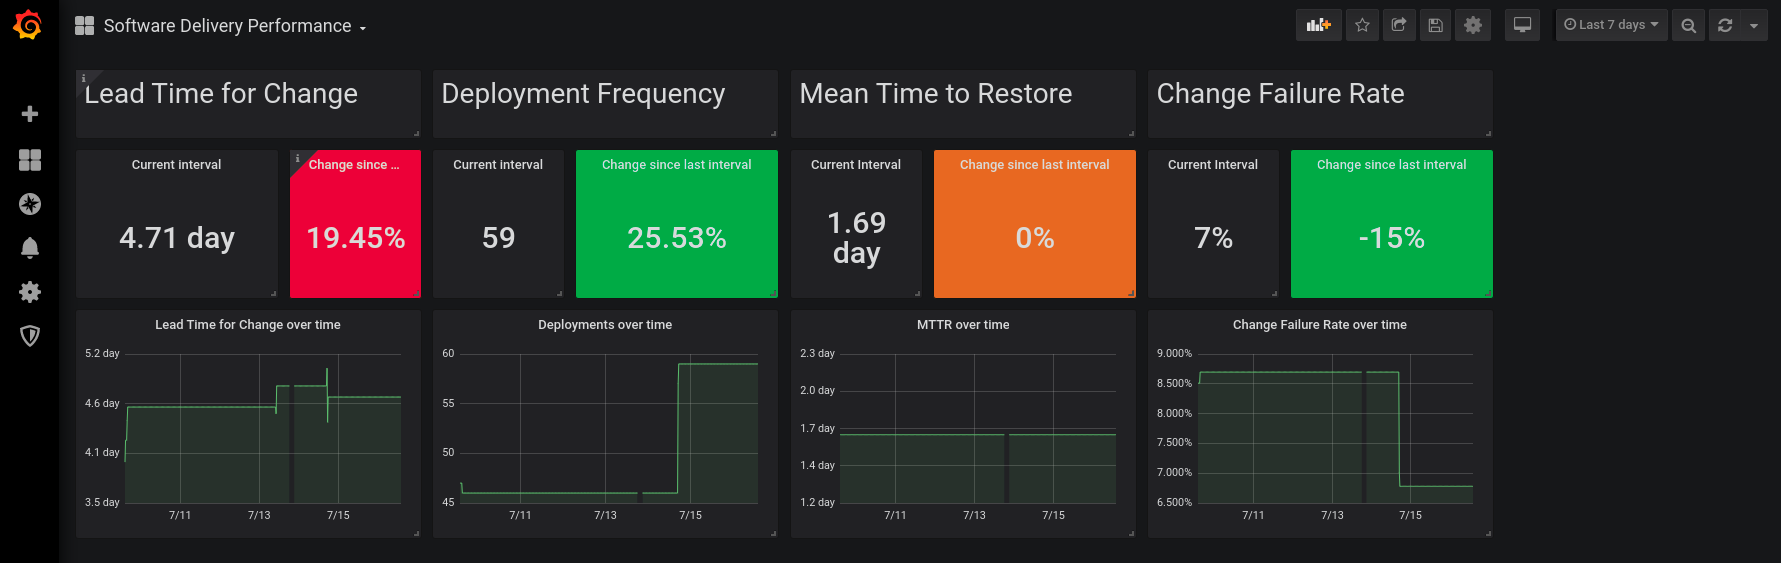 Software Delivery Performance dashboard